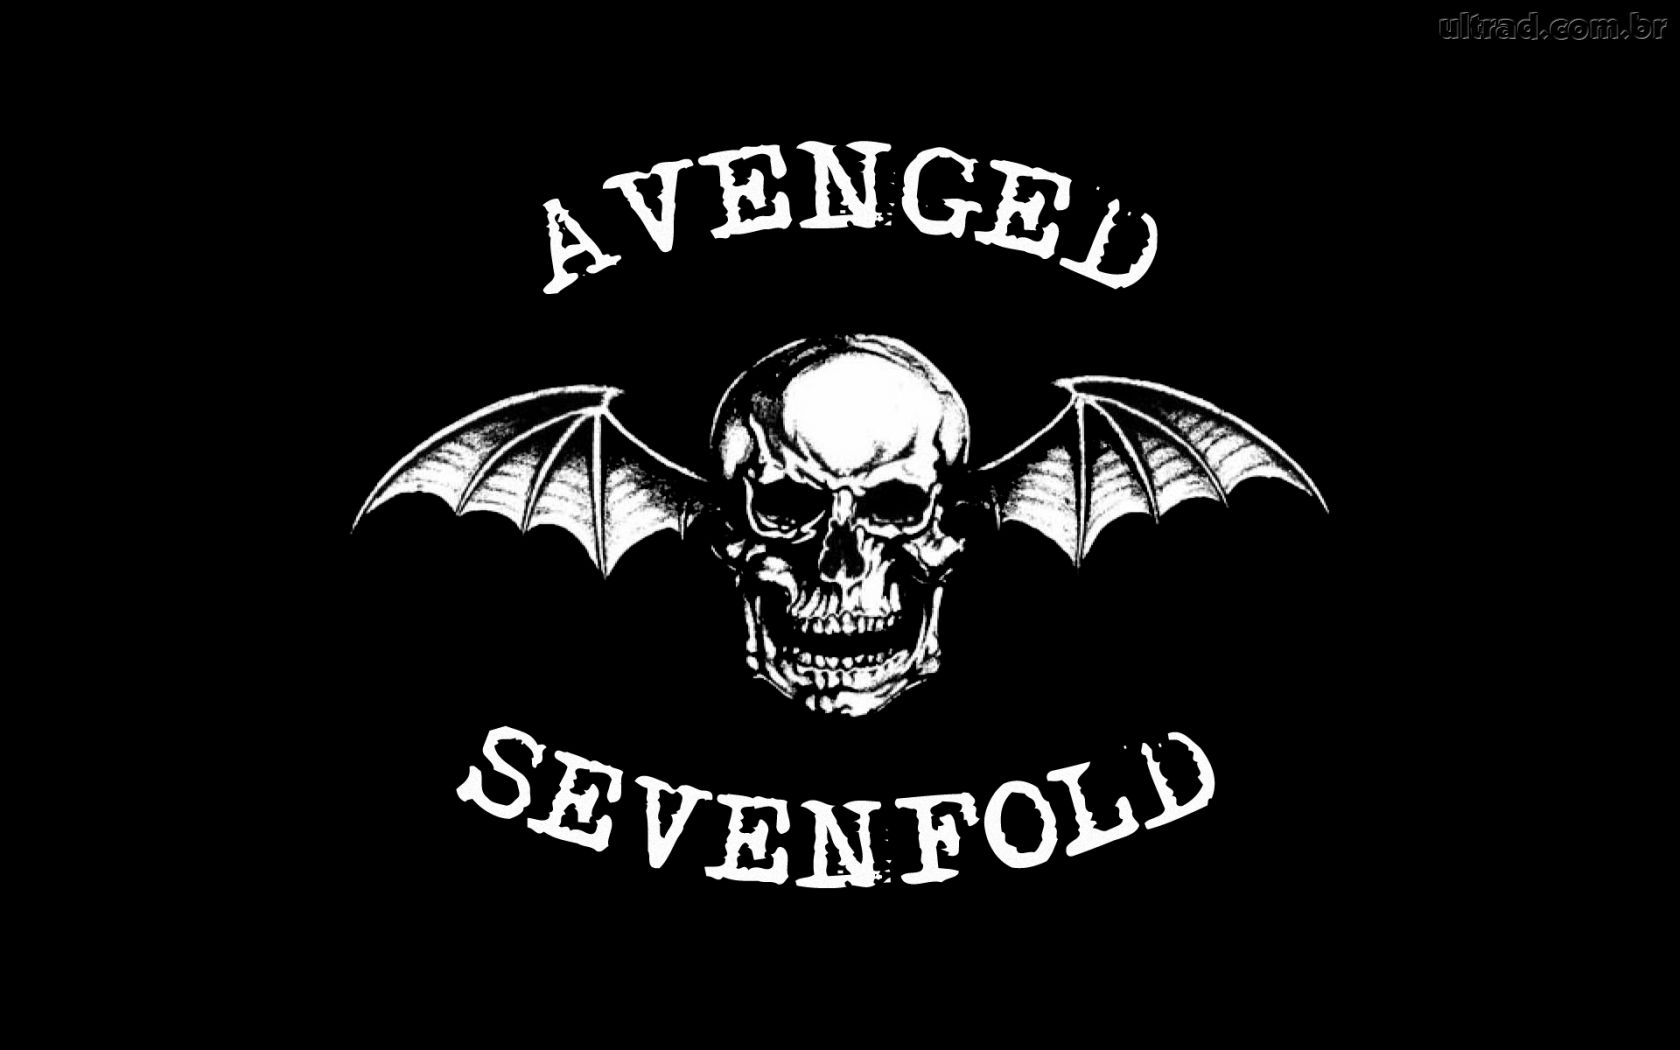 Avenged Sevenfold Have Yet Again Given Us A Little Insight Into What